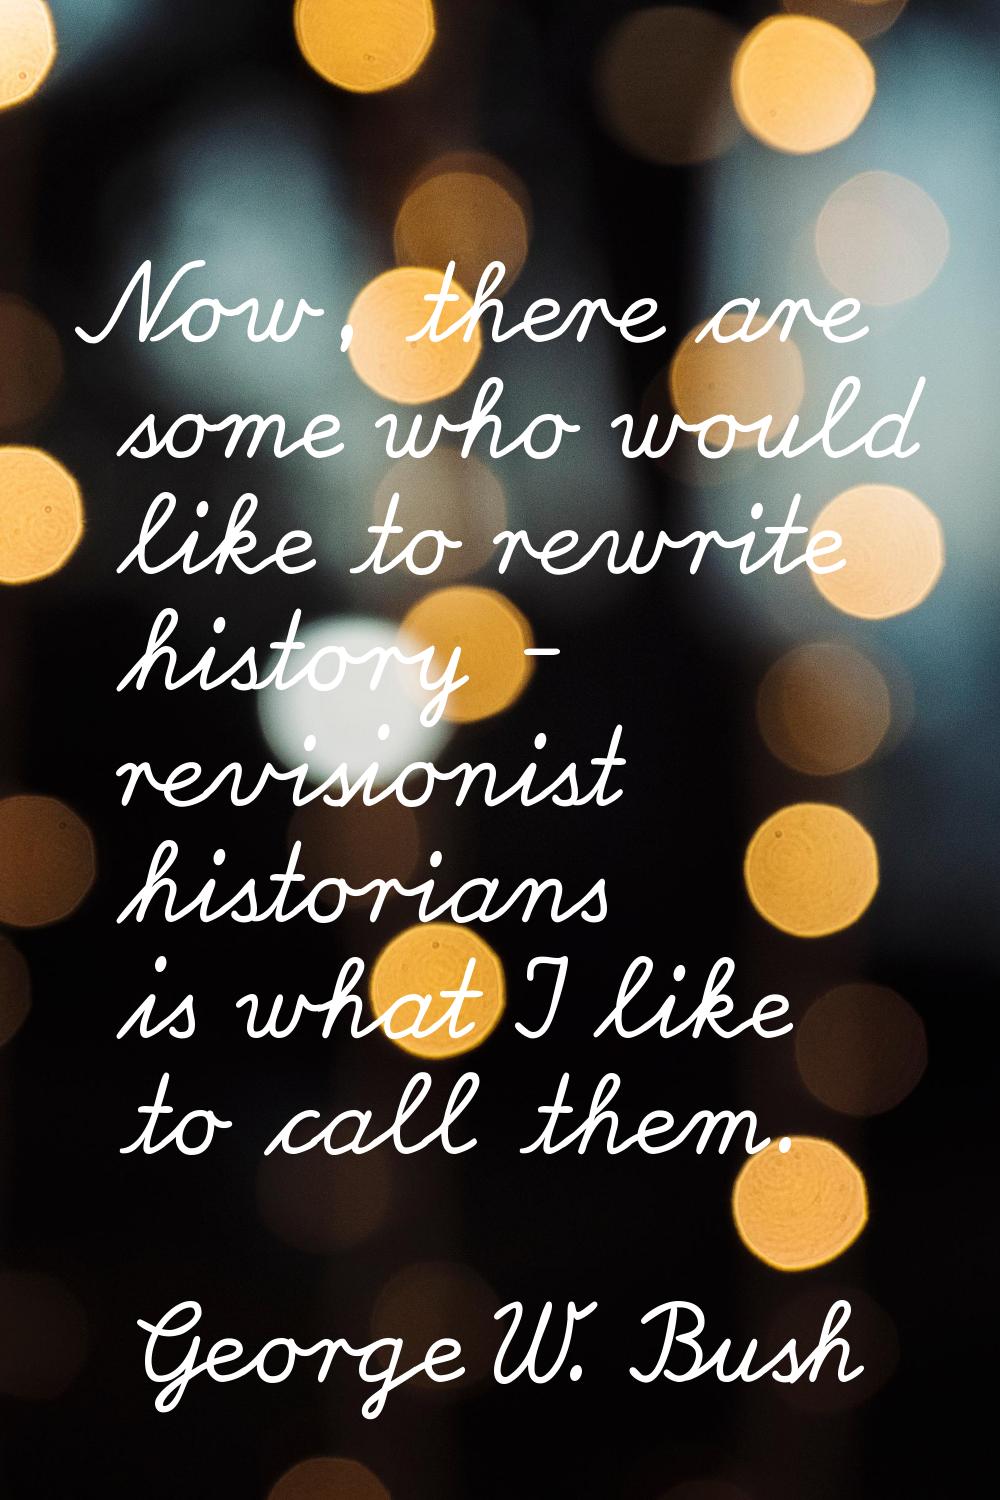 Now, there are some who would like to rewrite history - revisionist historians is what I like to ca